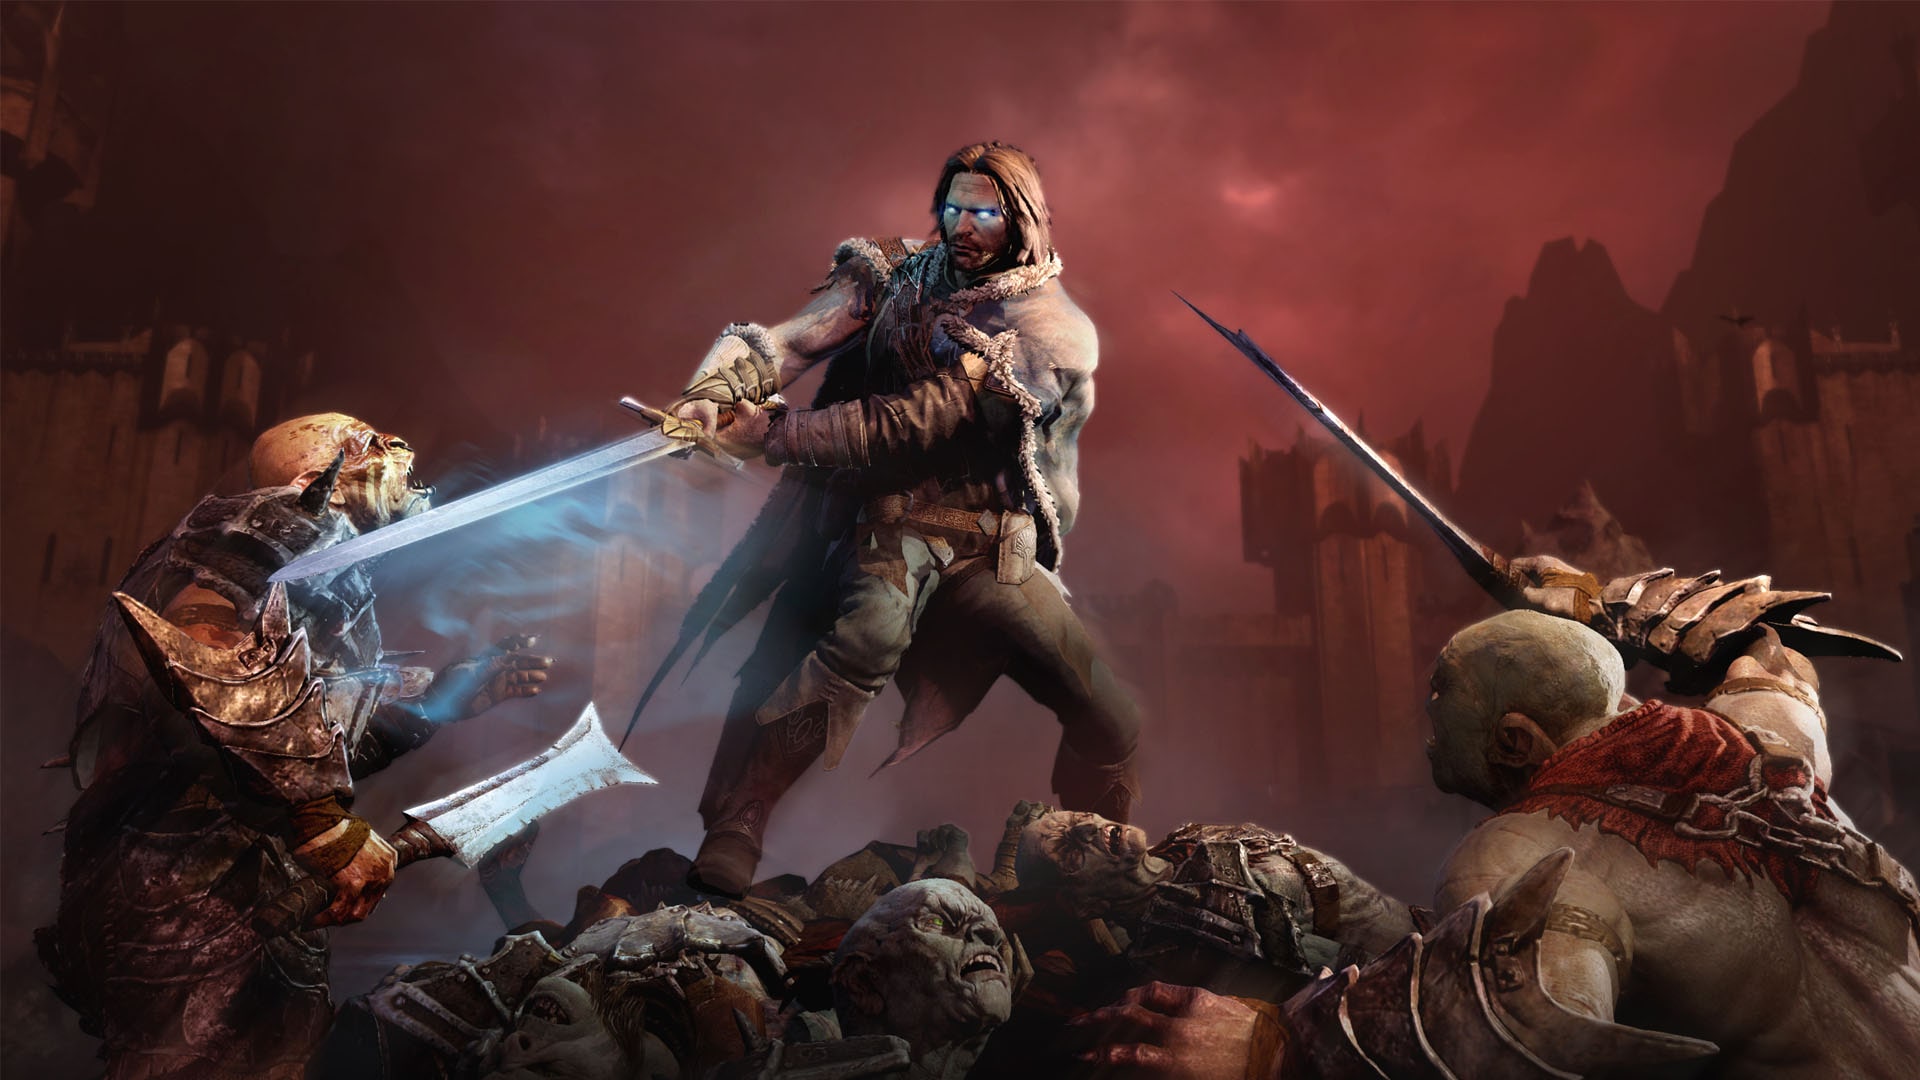 Middle-Earth: Shadow of Mordor - PlayStation 4